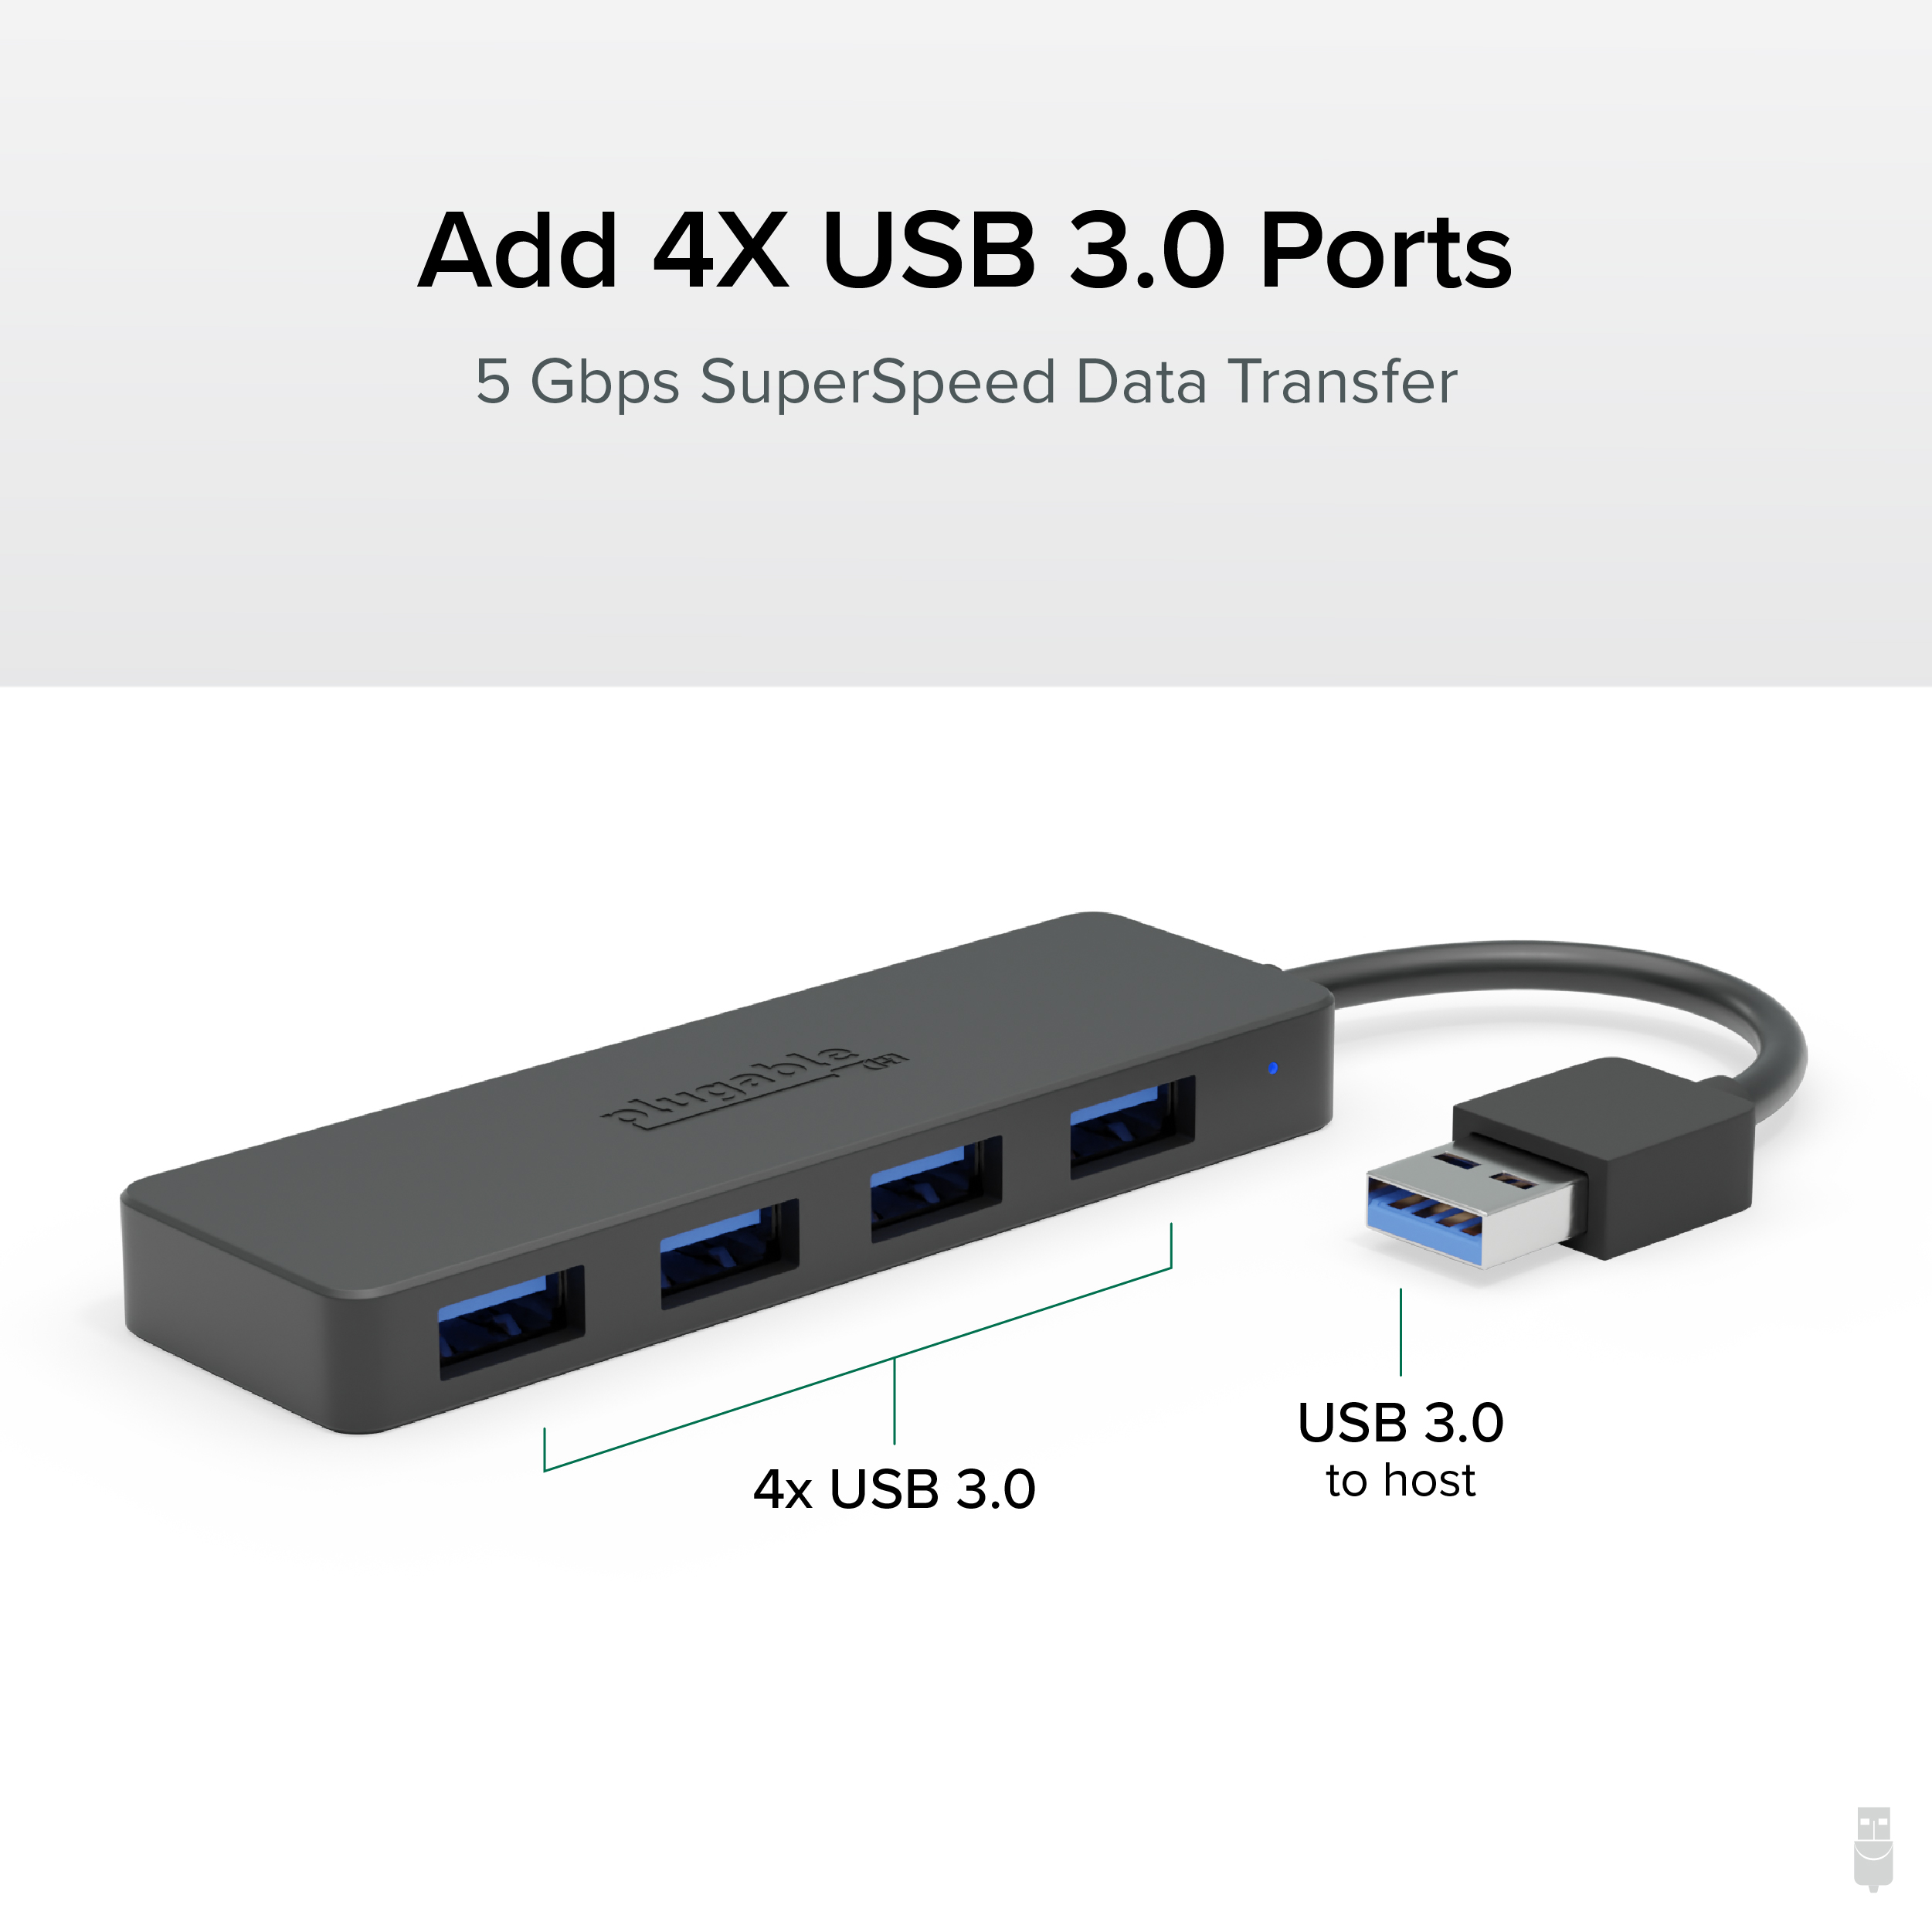 Plugable 4 Port USB Hub 3.0, USB Splitter for Laptop, Compatible with Windows, Surface Pro, PC, Chromebook, Linux, Android, Charging Not Supported - image 2 of 6